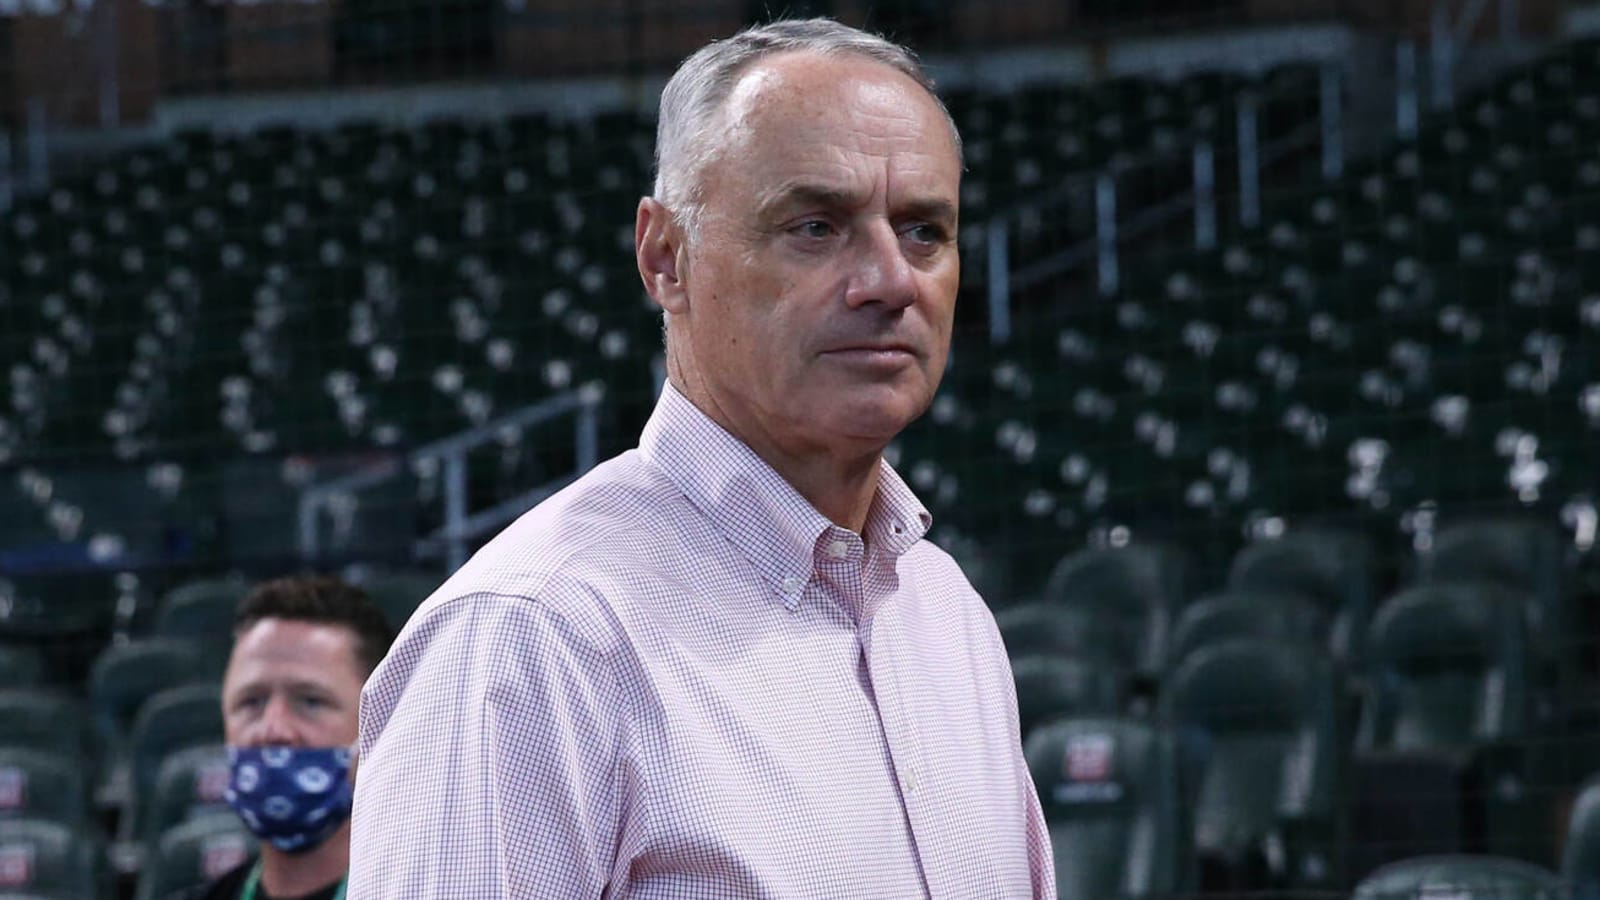 Rob Manfred's comment on MiLB wages was tone-deaf, disrespectful